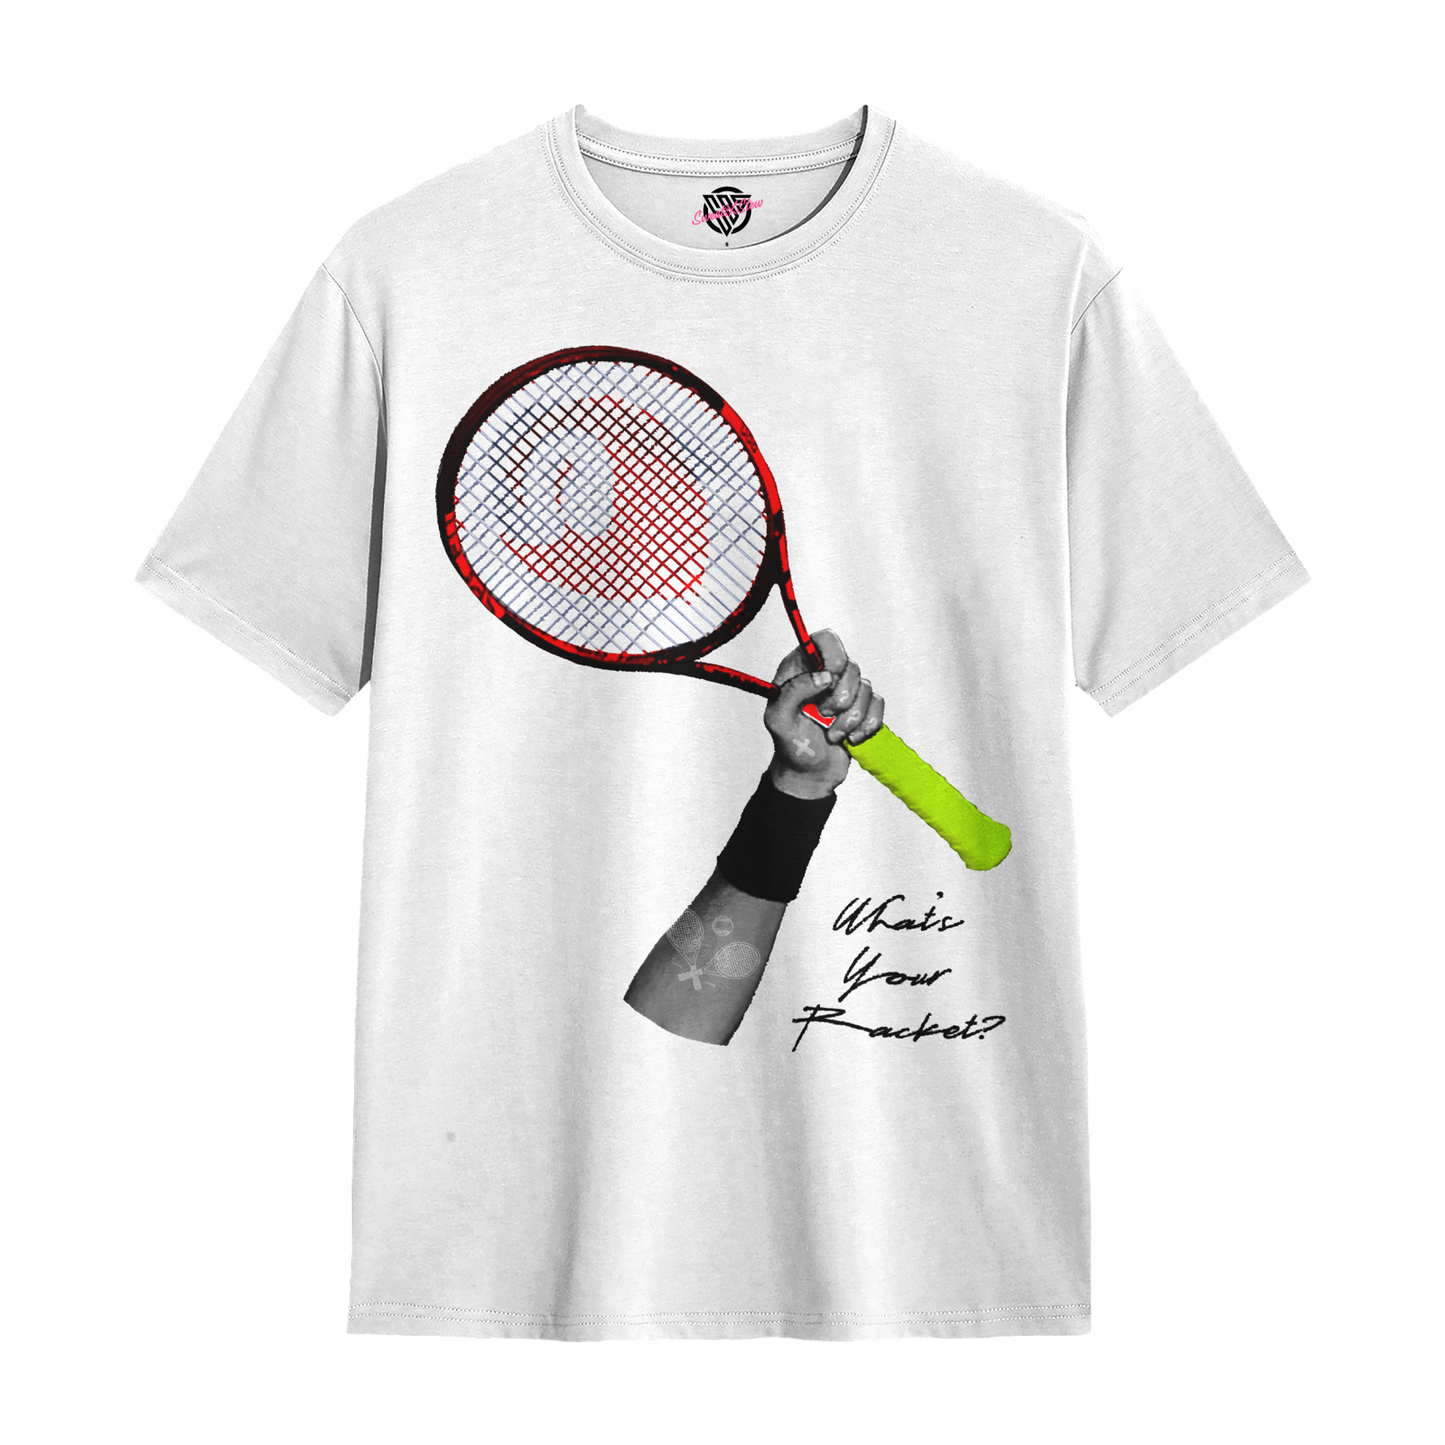 “What’s Your Racket” Tee